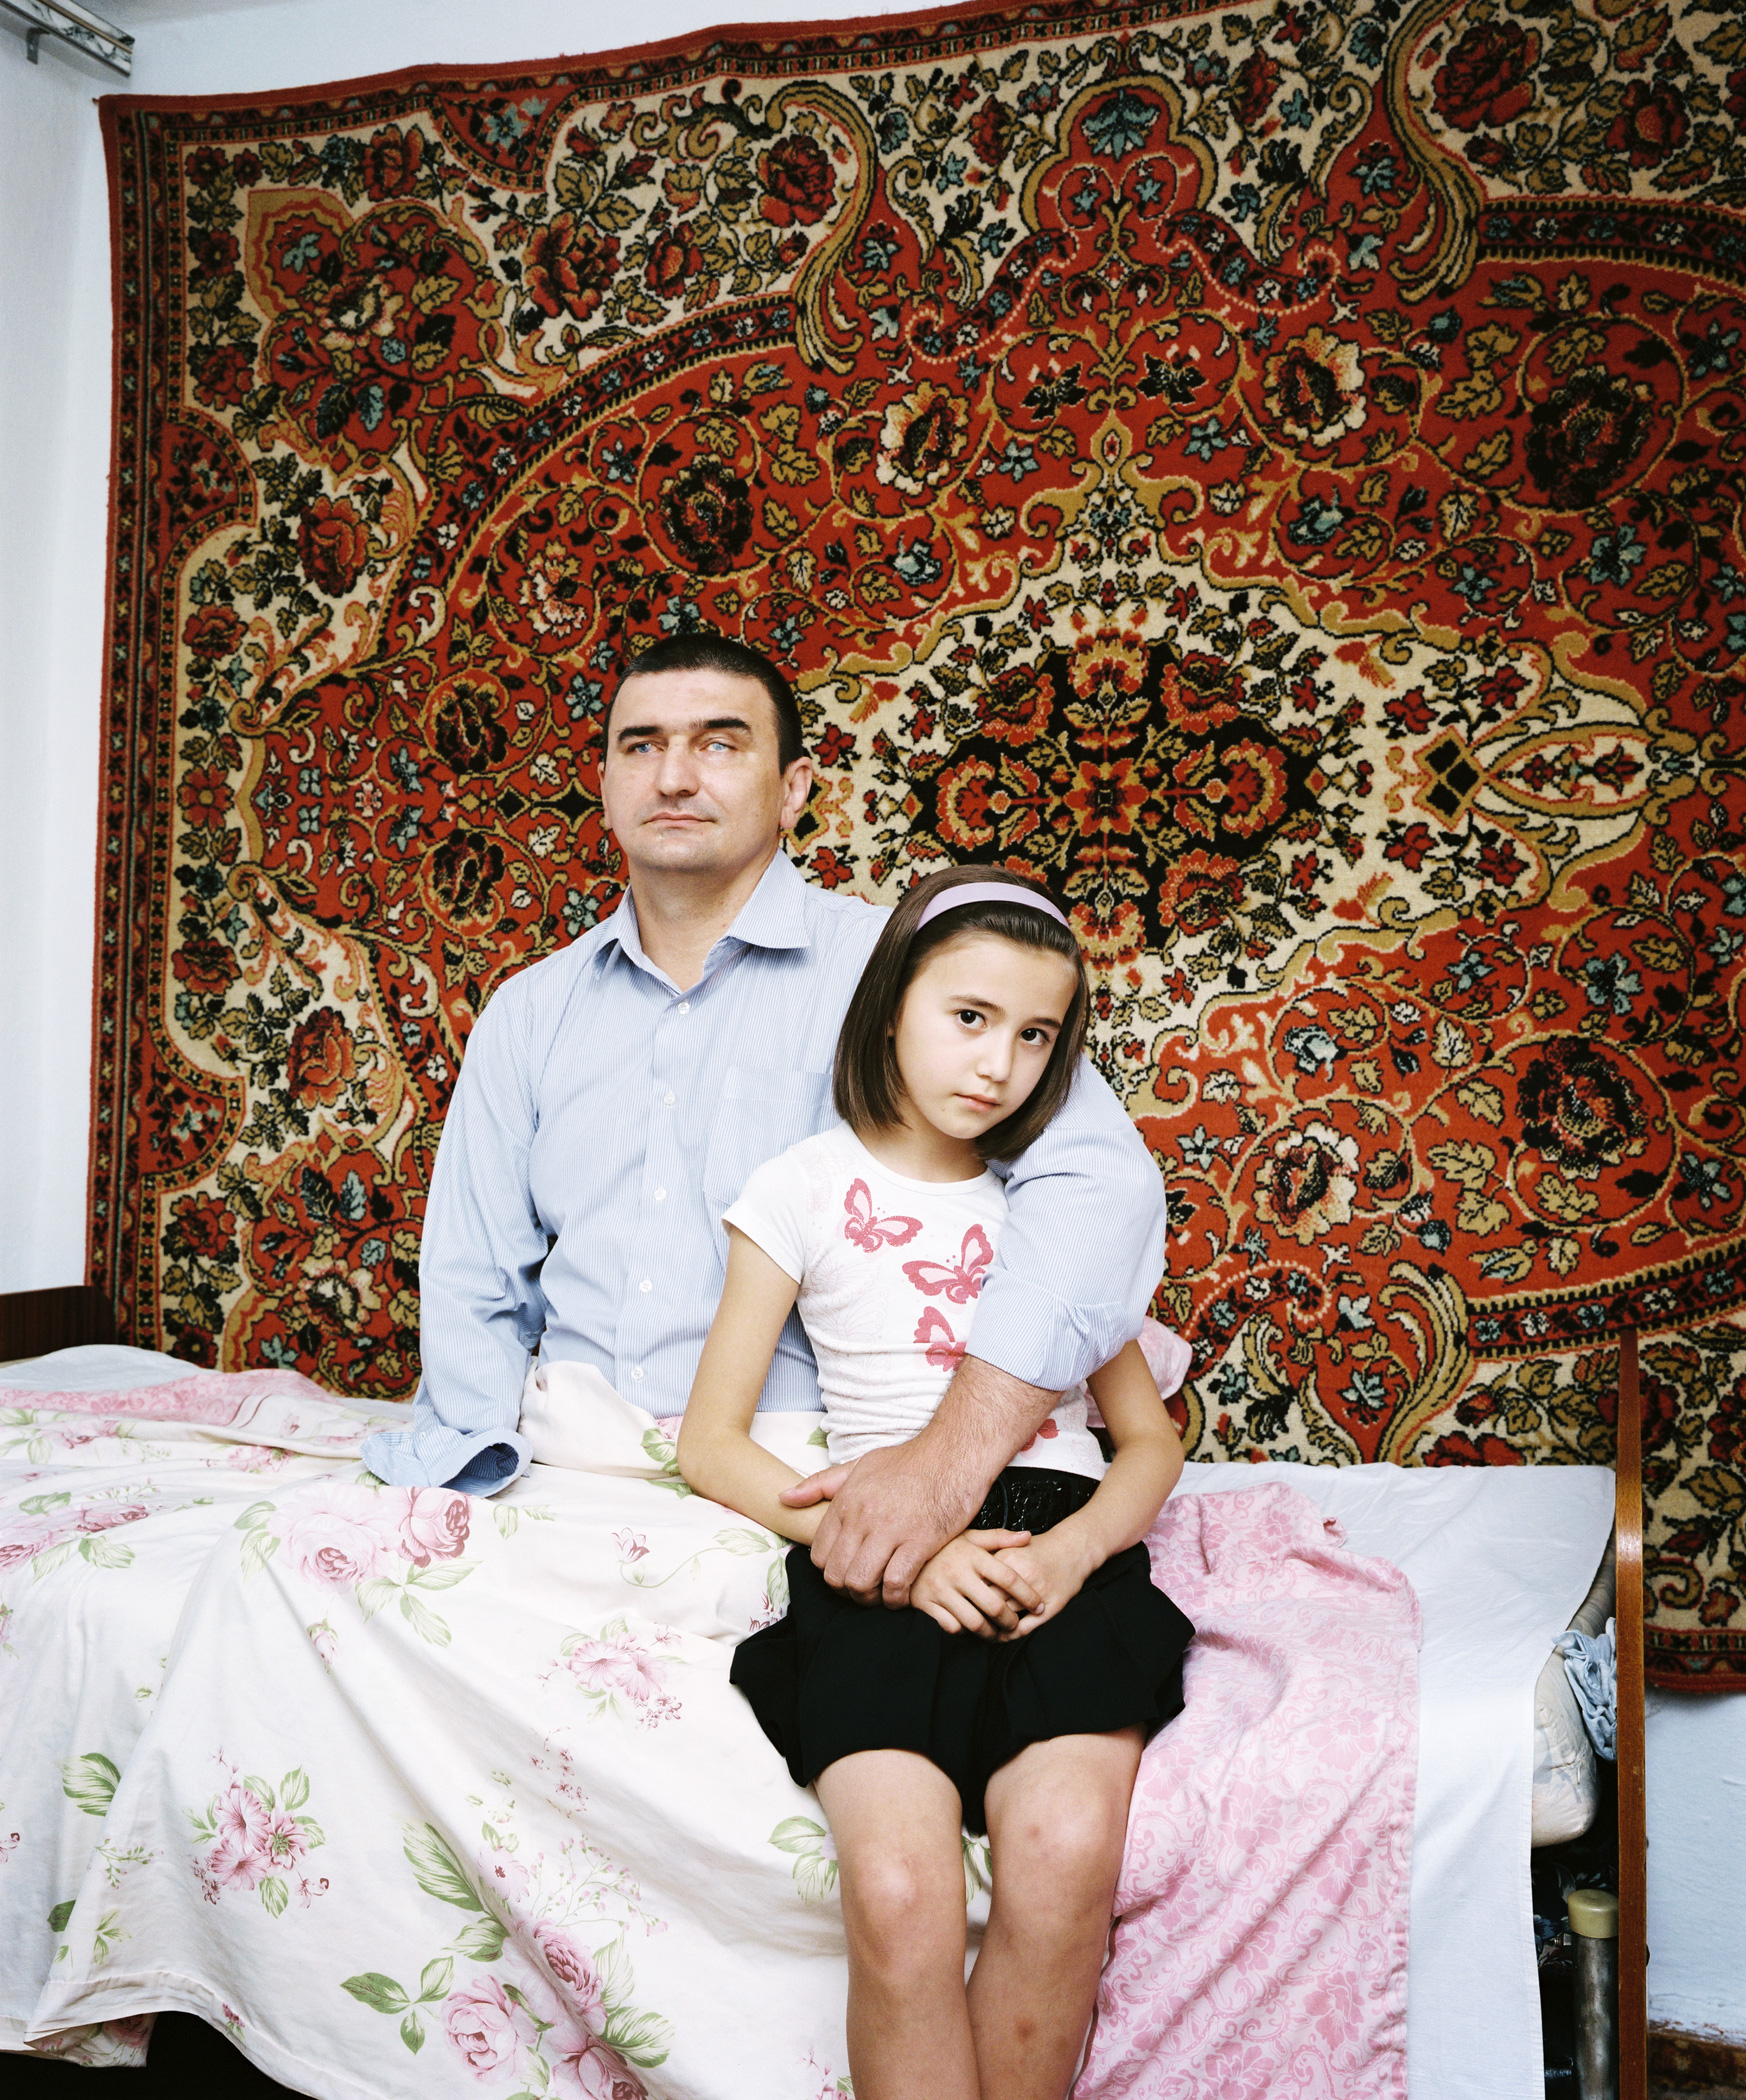     Rob Hornstra, Hamzad Ivloev, Nazran, Ingushetia, 2012 Â© Rob Hornstra / Flatland Gallery. From: An Atlas of War and Tourism in the Caucasus (Aperture, 2013).

